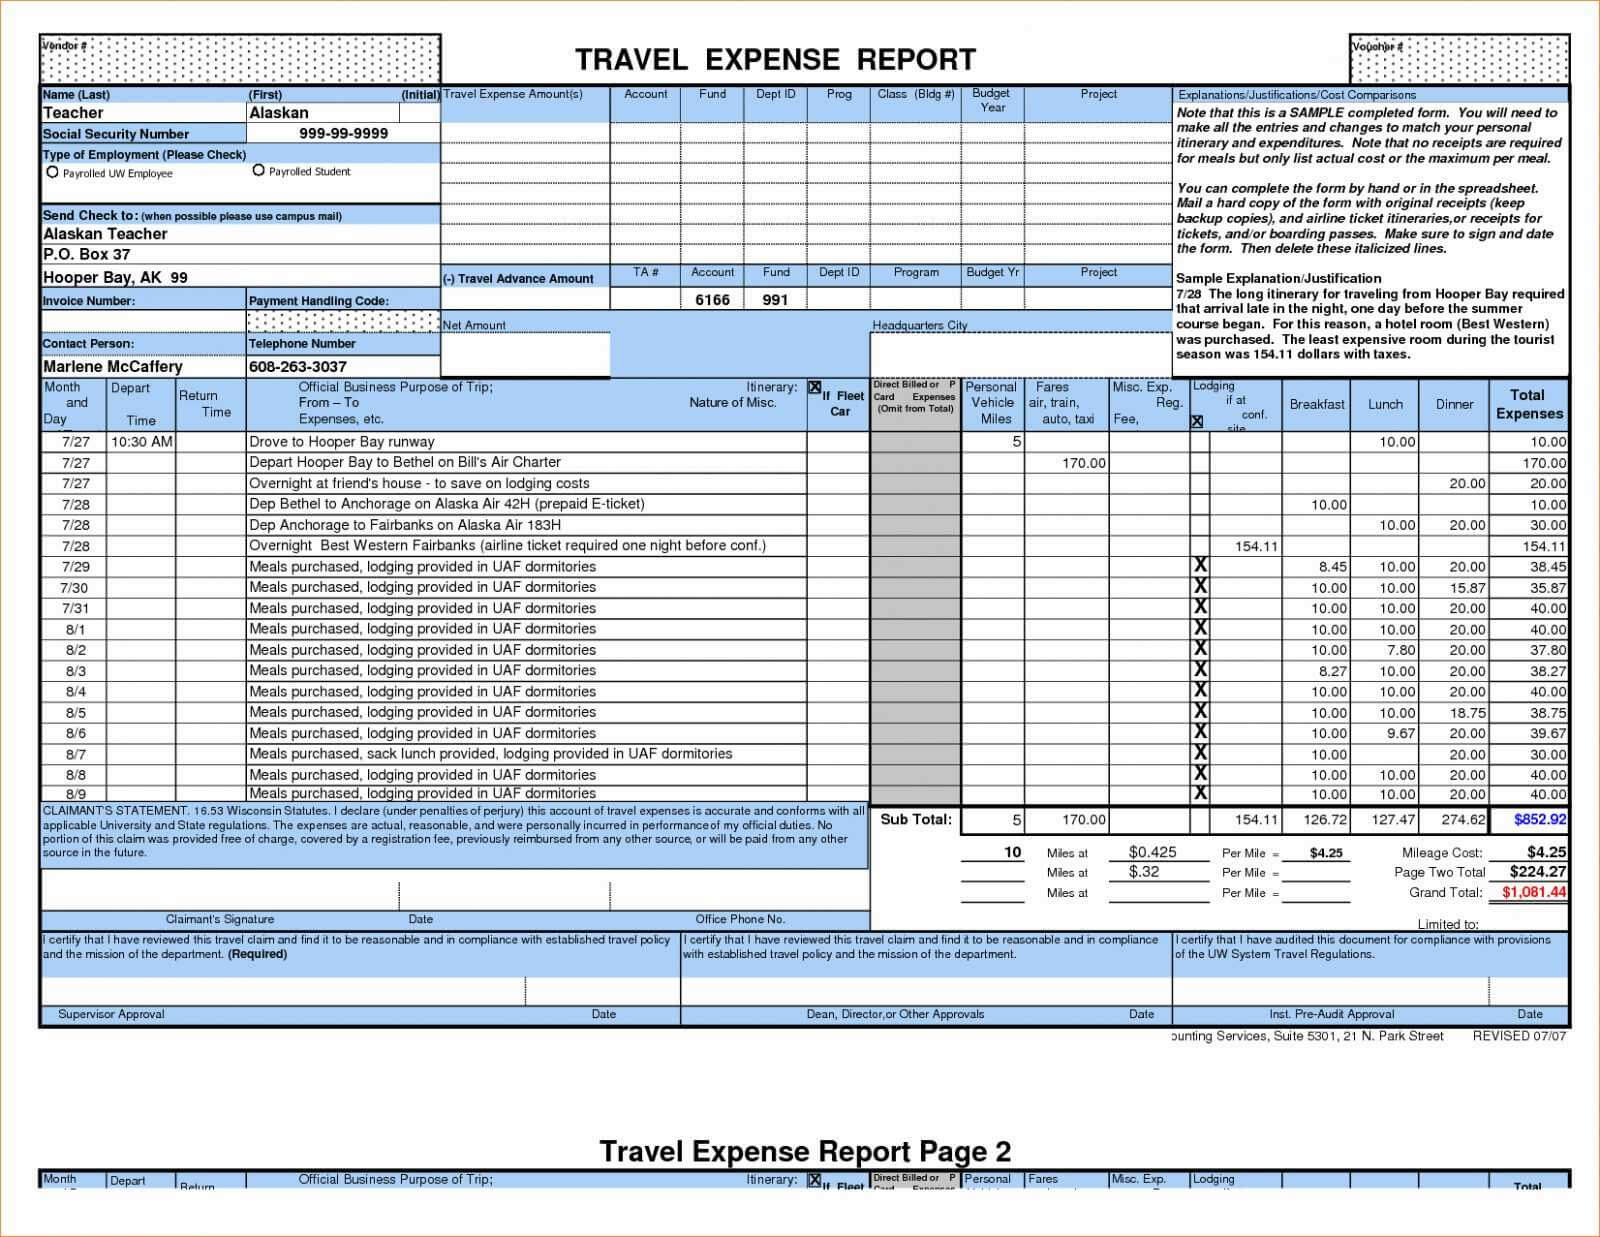 010 Expense Report Spreadsheet Template Printable Travel Xls Throughout Expense Report Spreadsheet Template Excel